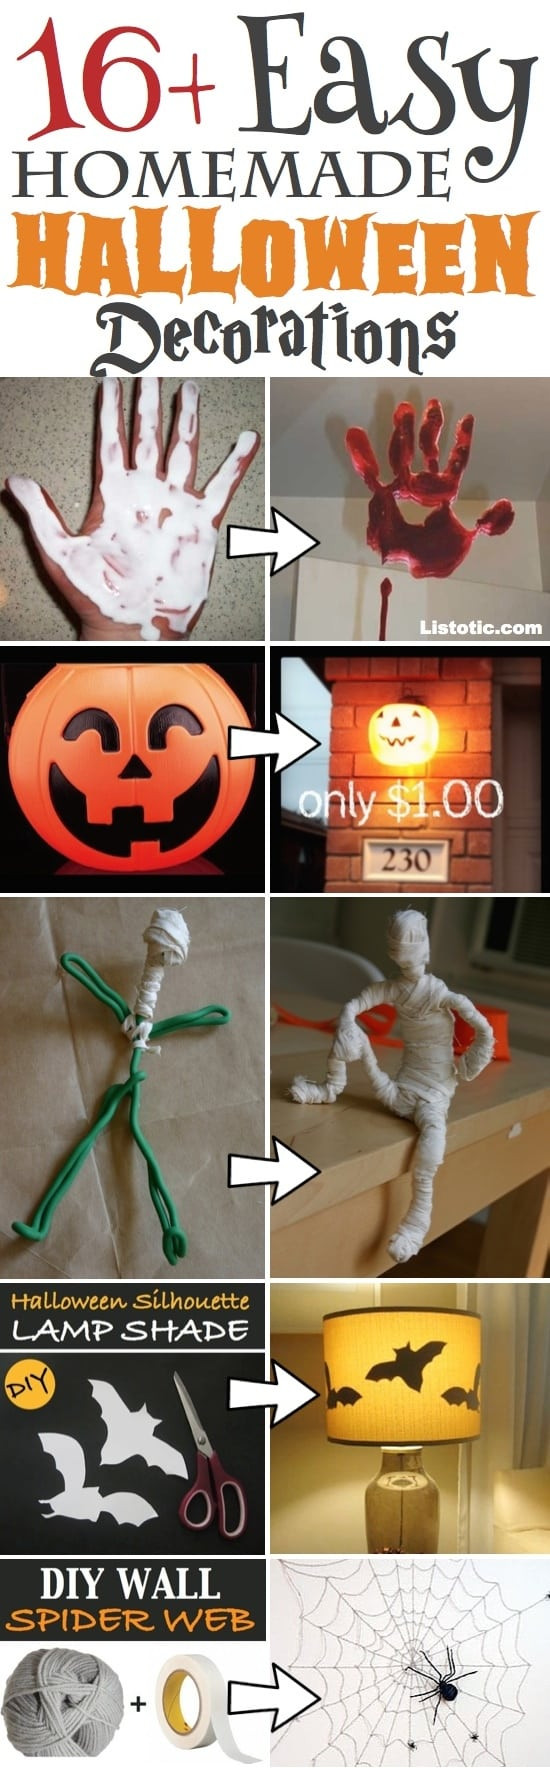 Easy Diy Halloween Decorations For Kids
 16 Easy & Awesome Homemade Halloween Decorations